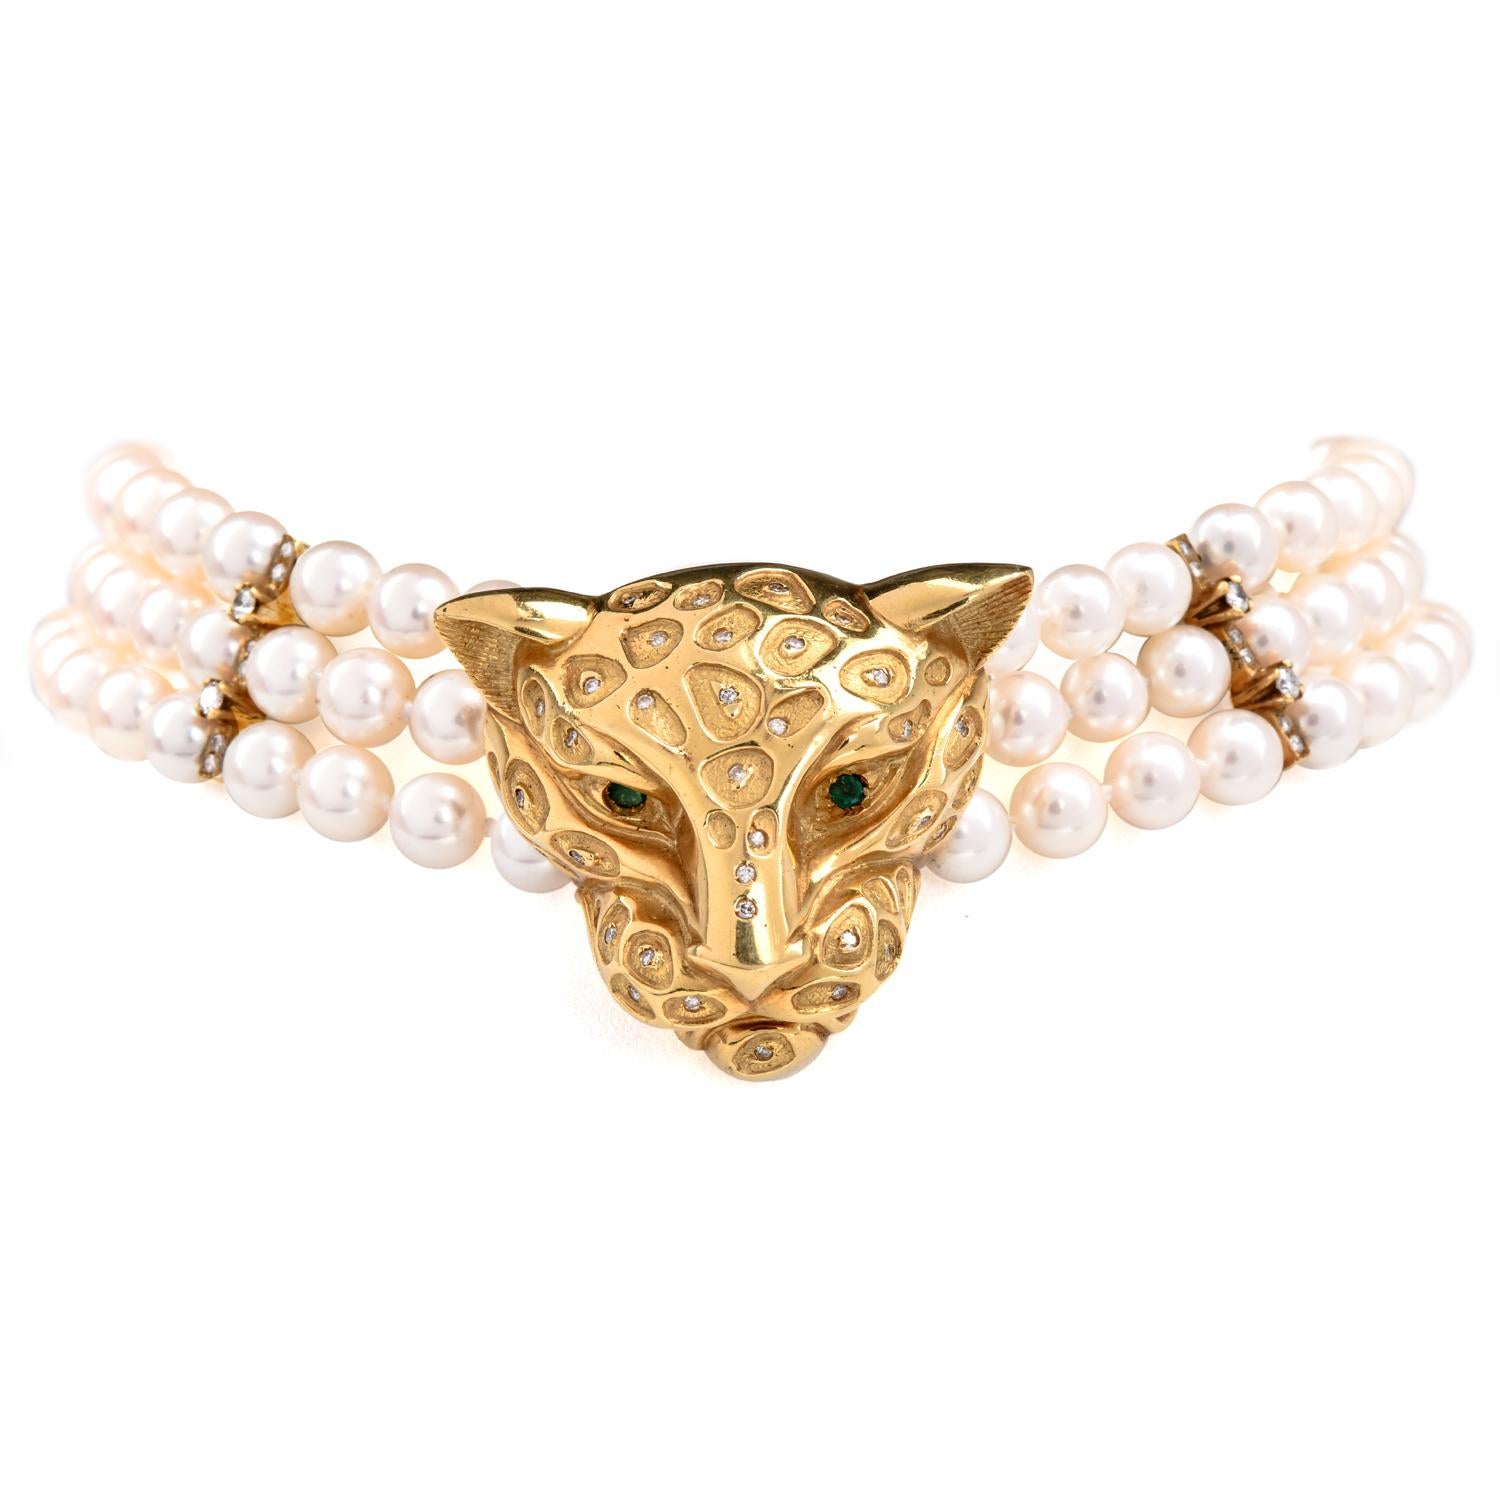 Presenting a remarkable estate jewelry piece: a pearl choker necklace featuring an opulent panther head clasp adorned with diamonds and emerald eyes, all set in luxurious 18K yellow gold. This captivating choker necklace is formed by three strands